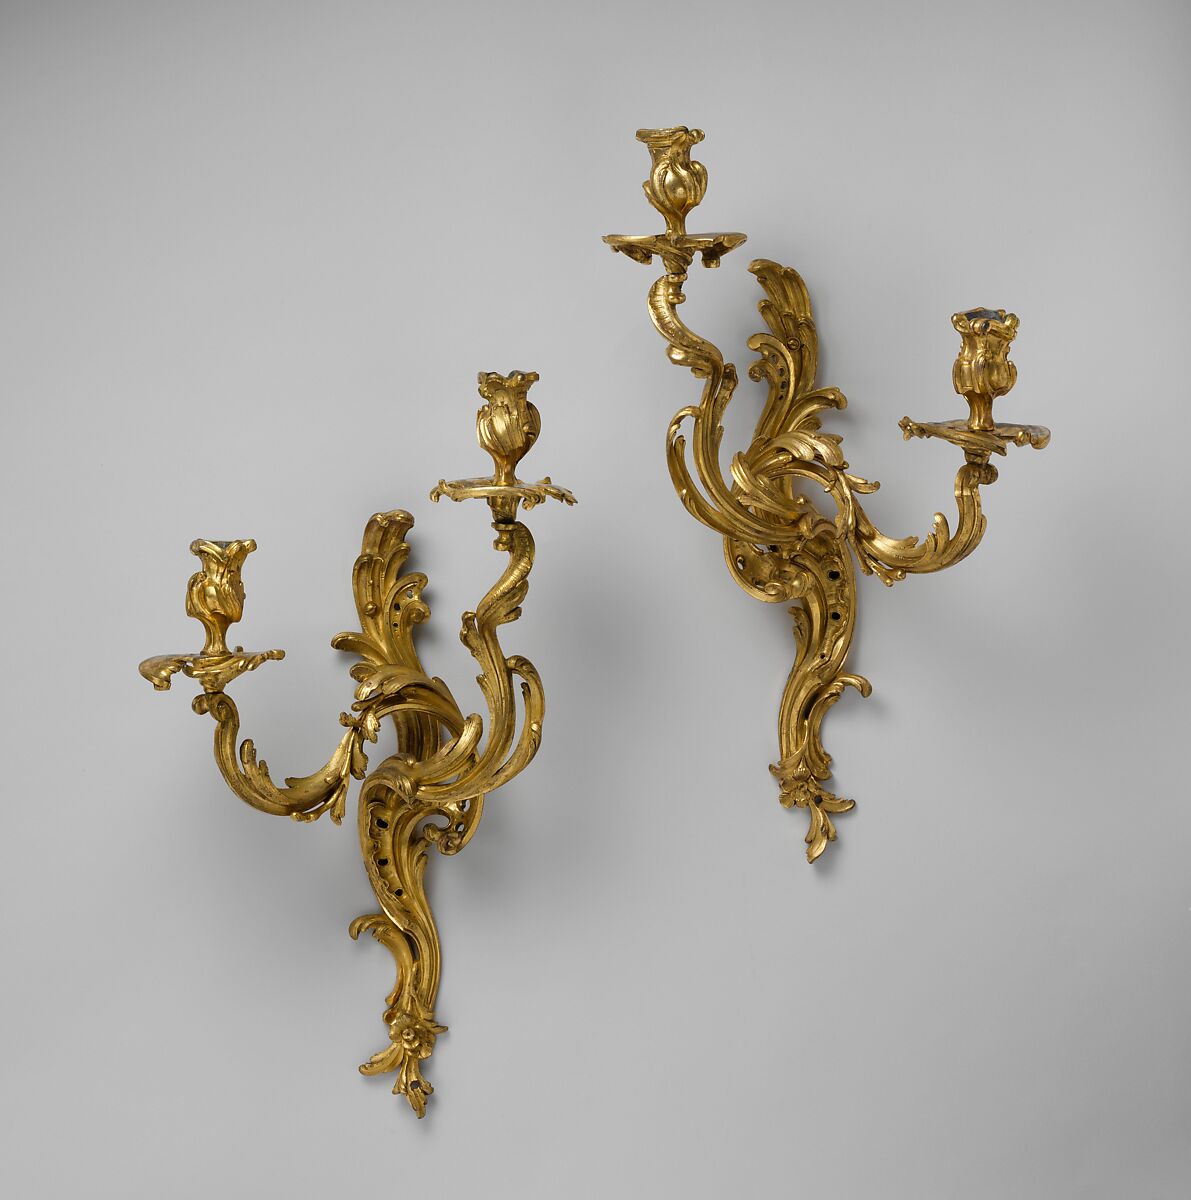 Pair of two-light wall brackets, Gilt bronze, French 